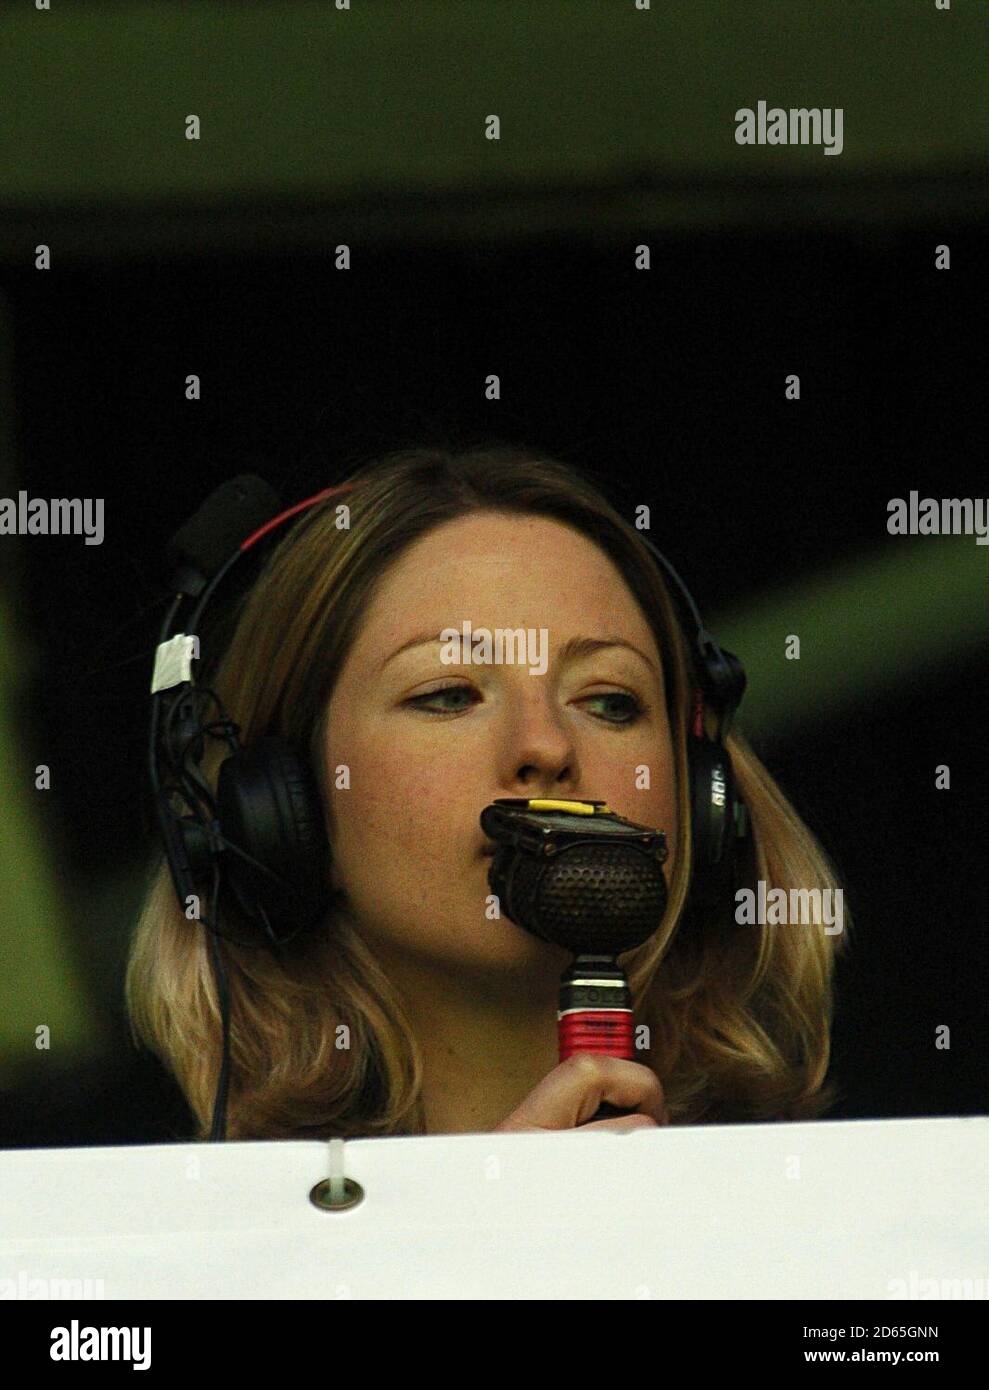 BBC sports commentator Jacqui Oatley, takes her position to become the first woman commentator in Match of the Day's 43-year history. Stock Photo